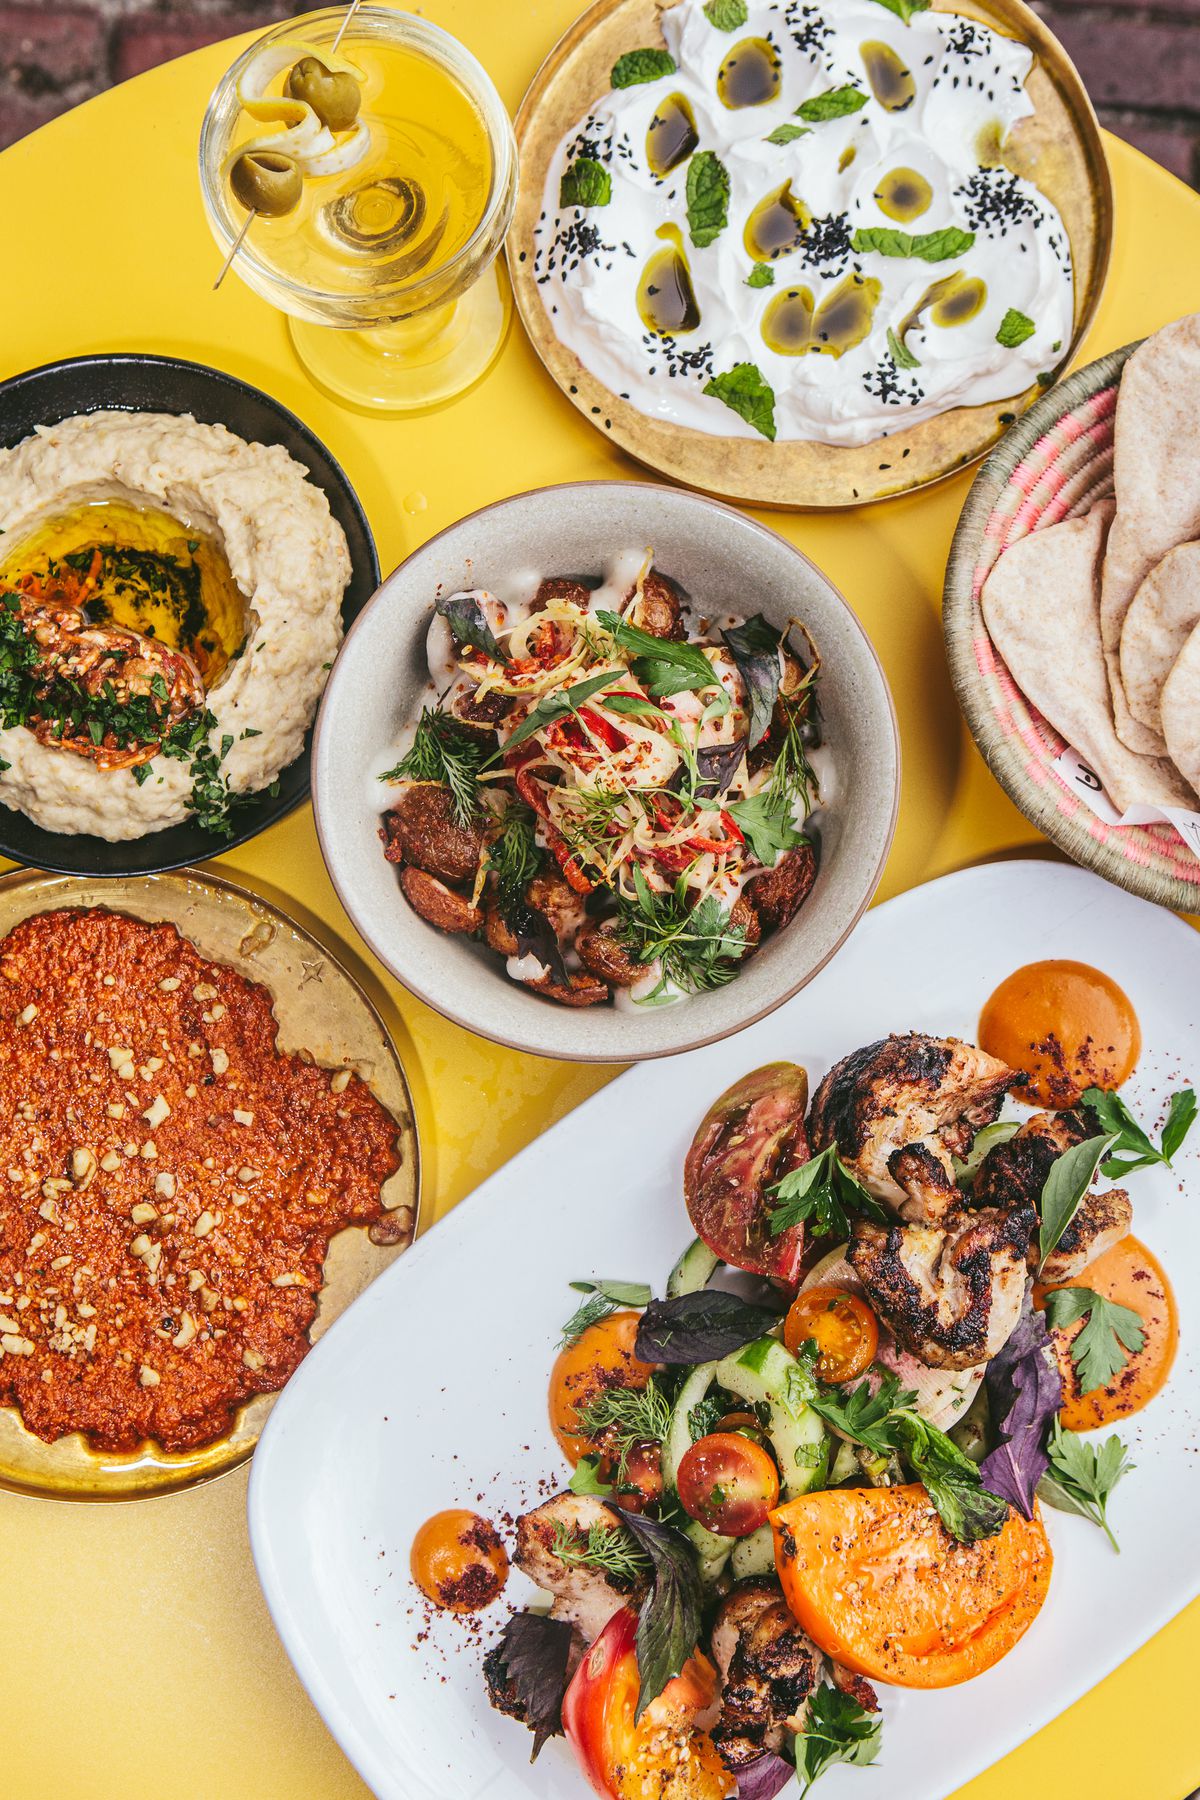 Several dishes with Middle Eastern fare, like hummus, fresh pita, spiced and roasted vegetables, and more.